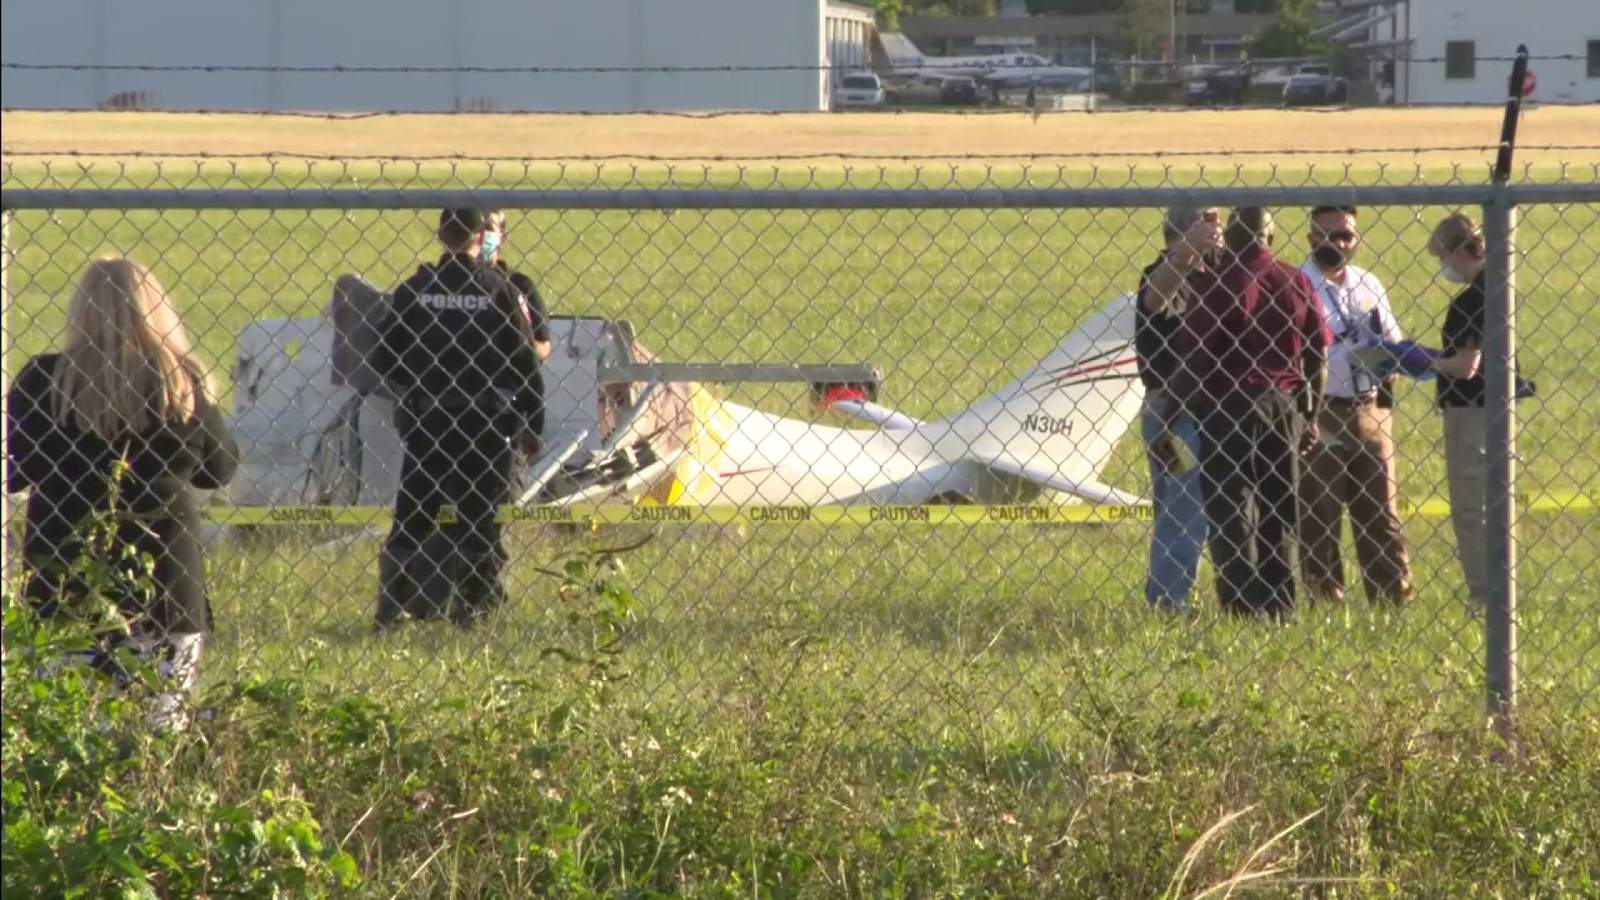 Plane crashes near runway at North Perry Airport in Pembroke Pines, killing pilot